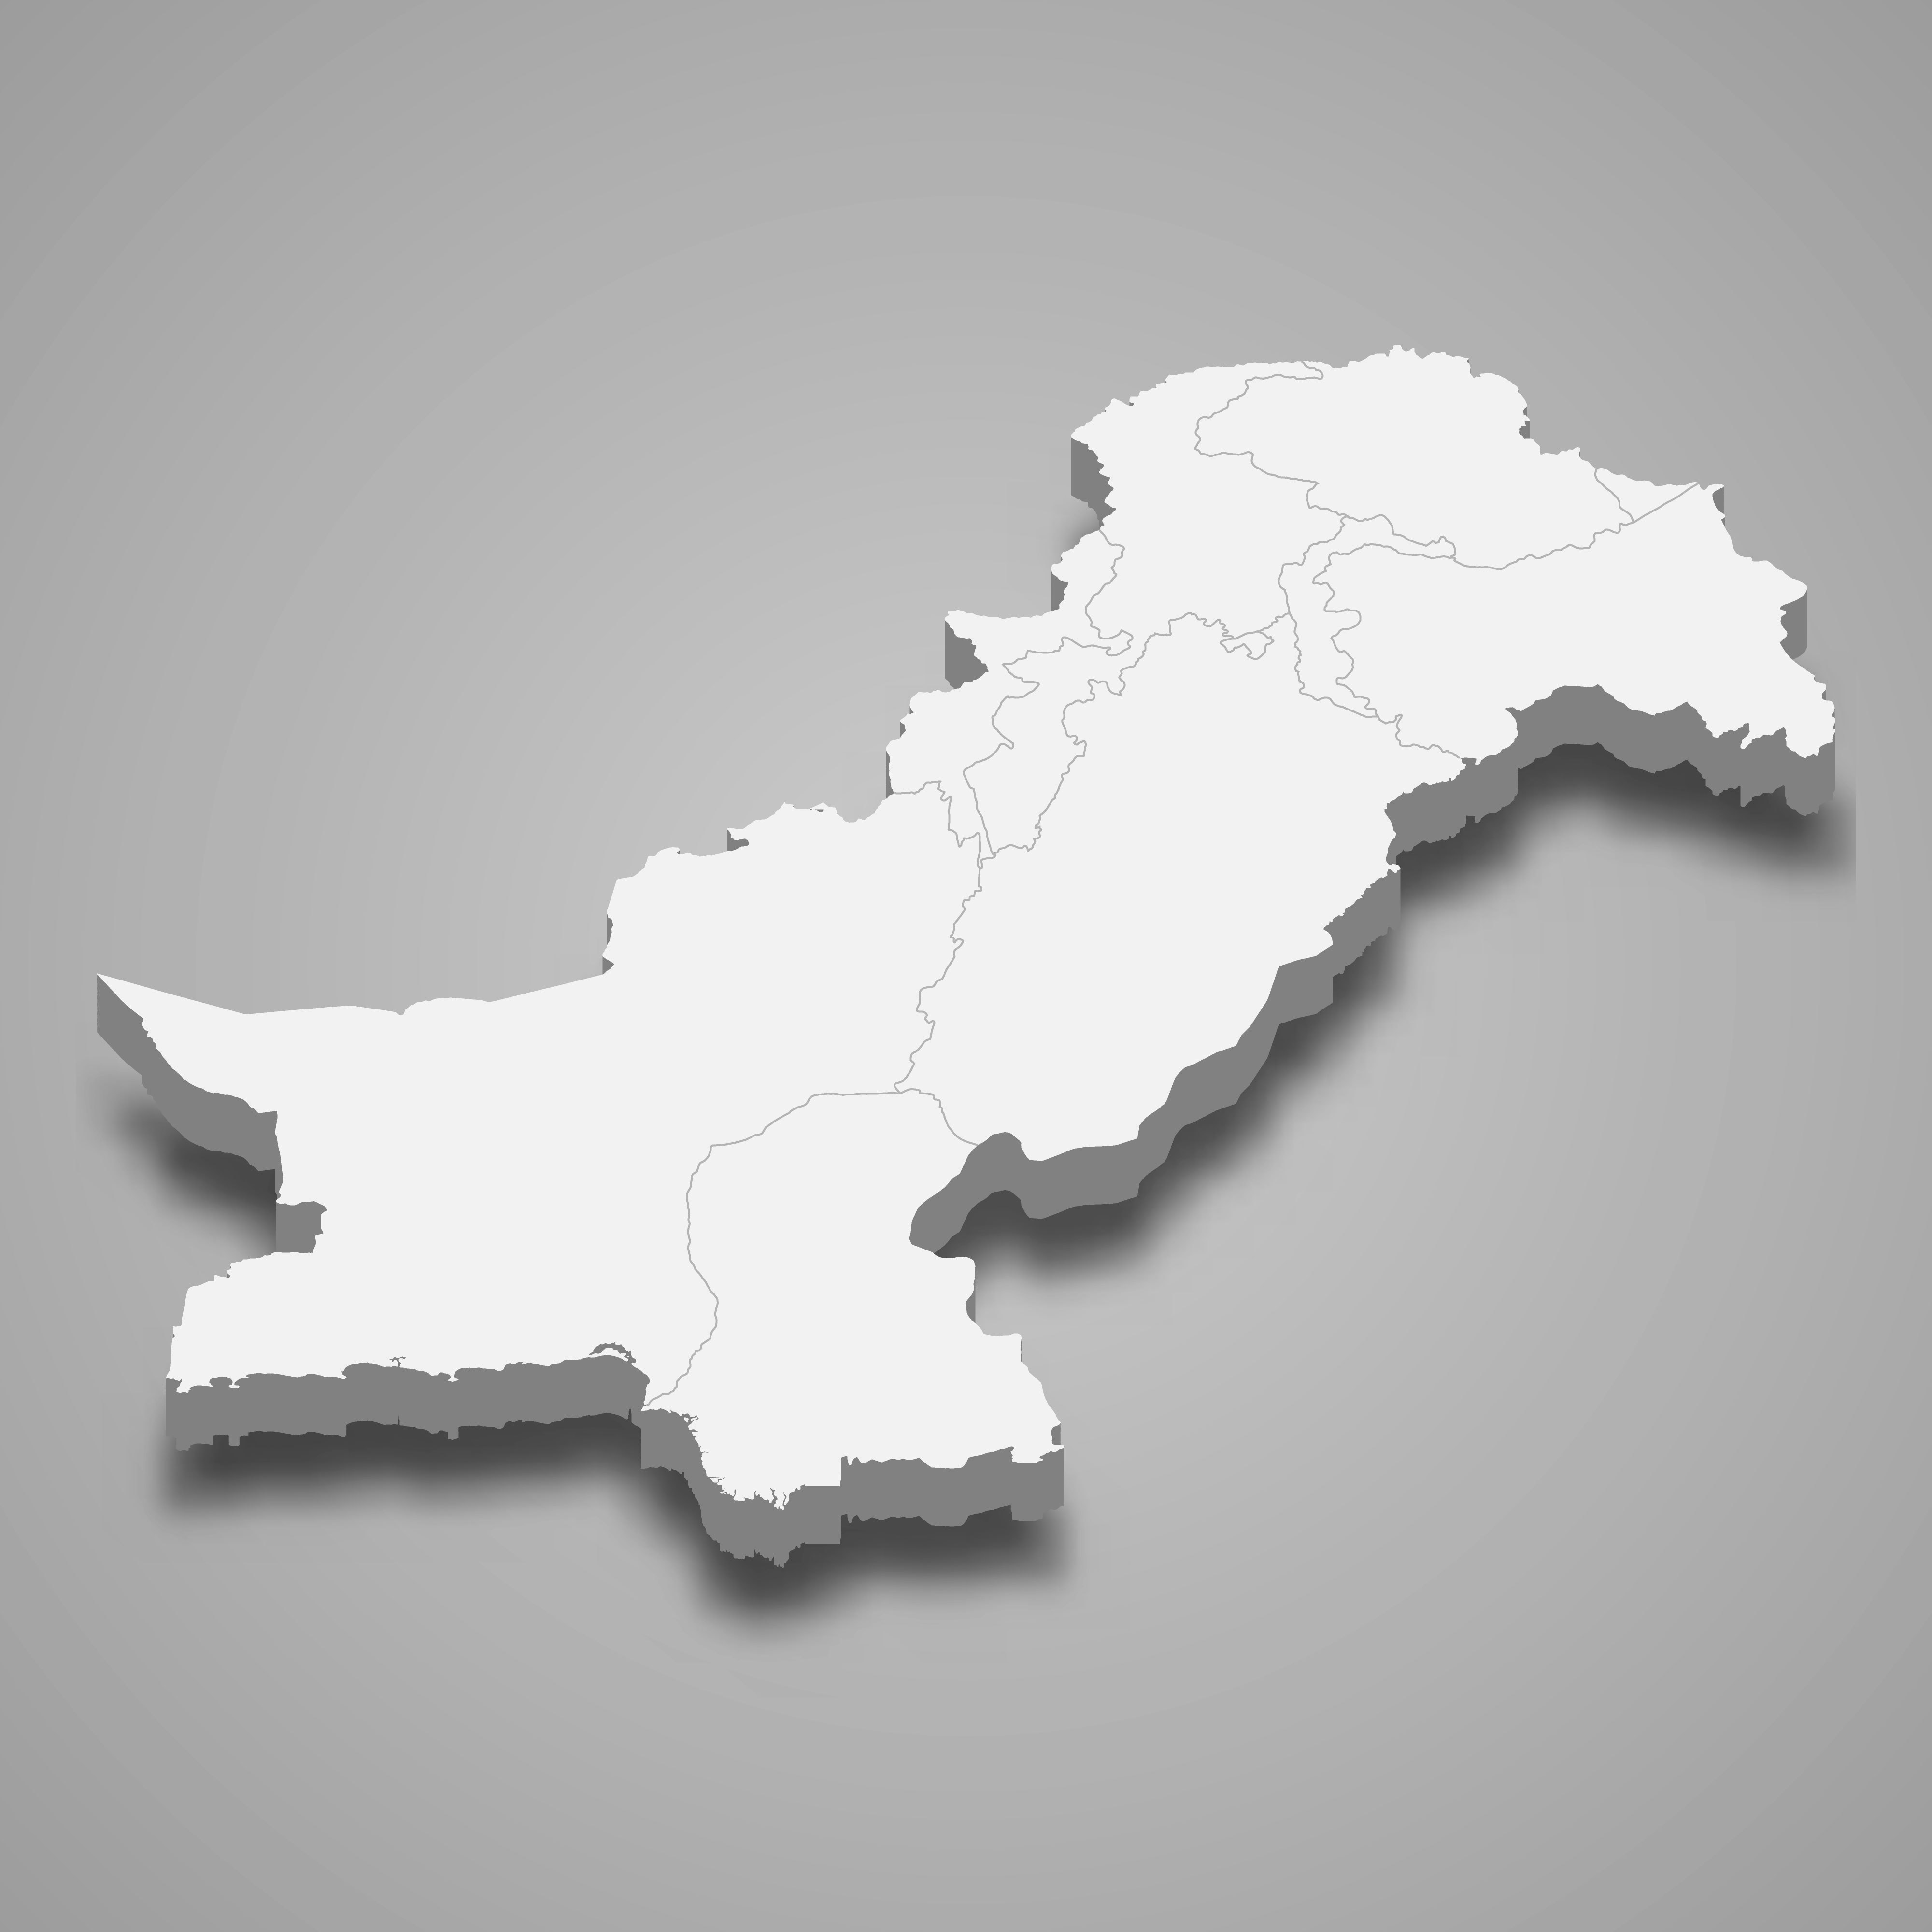 3d map of Pakistan with borders of regions. 3d map with borders Template for your design